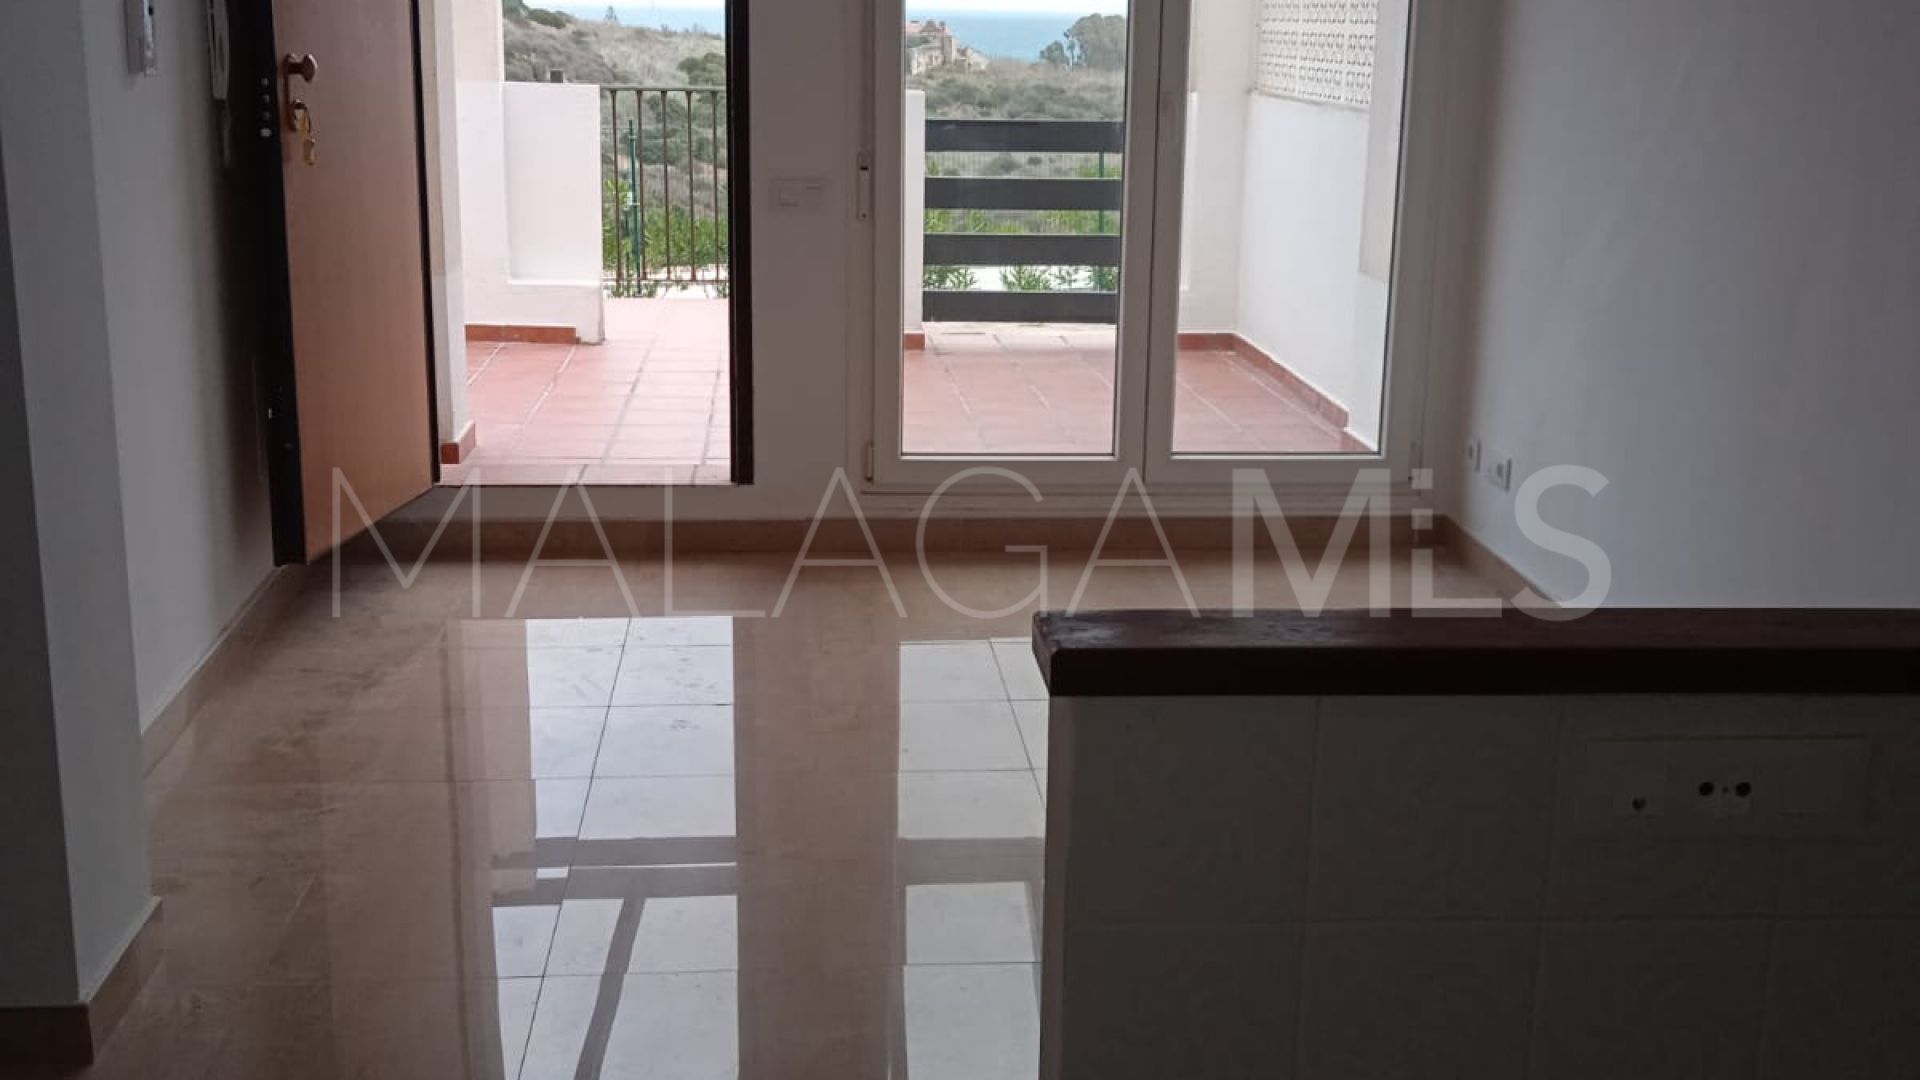 For sale Manilva duplex penthouse with 2 bedrooms